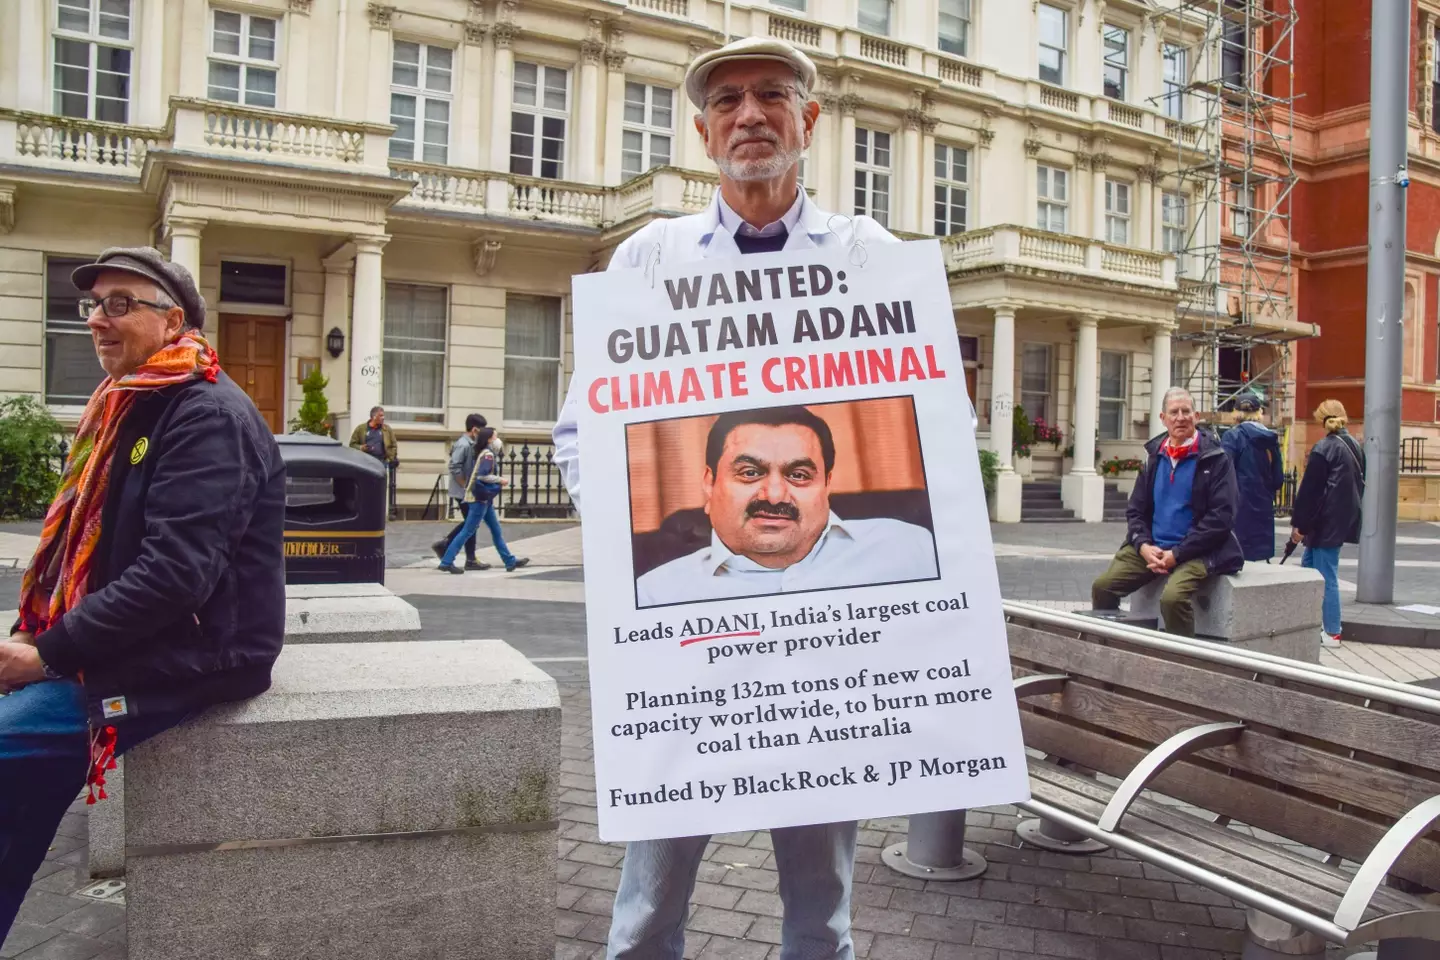 Adani may have mass wealth but he has been branded by many environmentalists as being a 'climate criminal'.